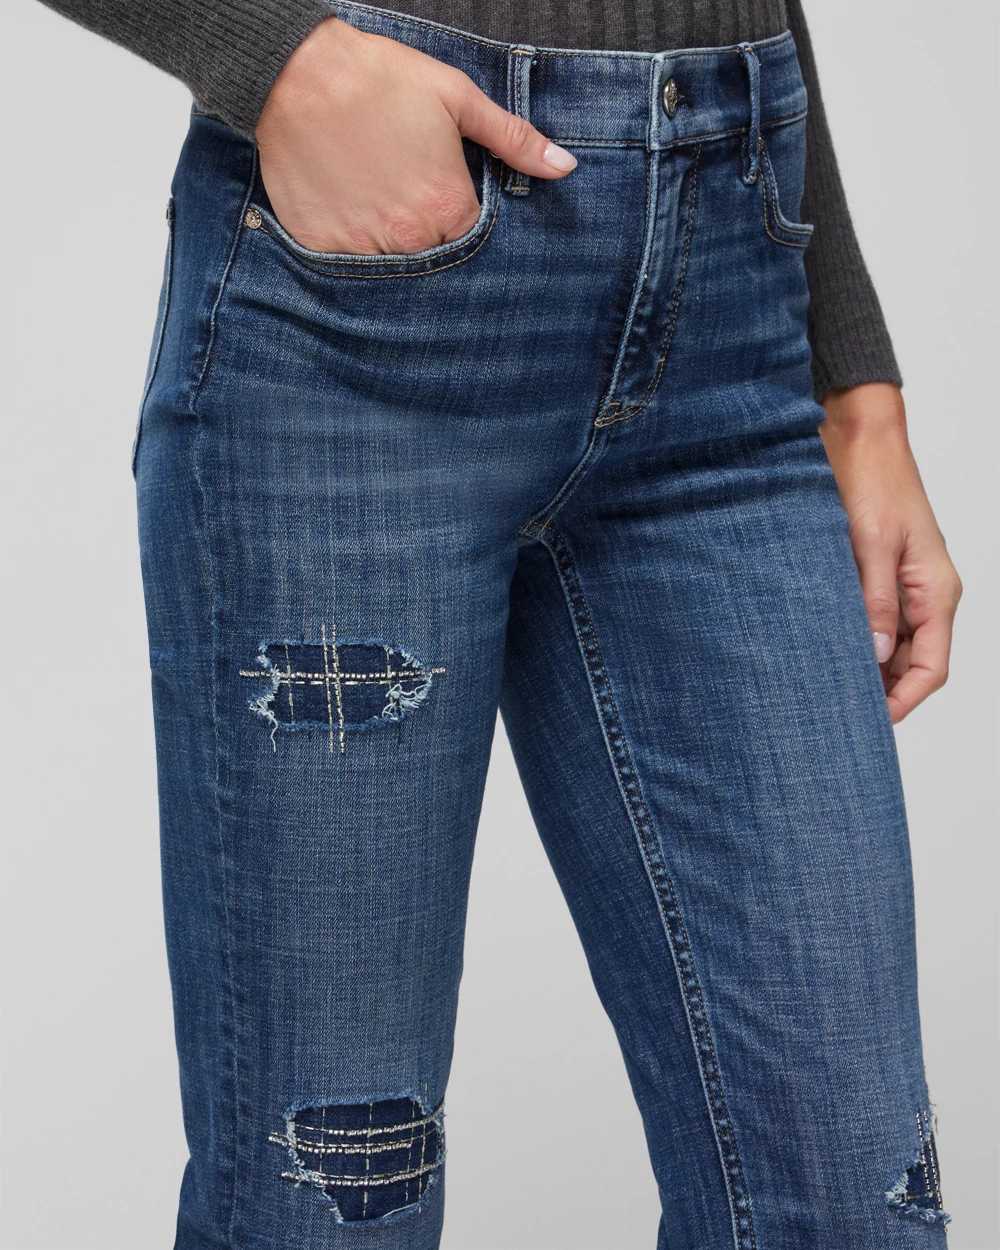 High-Rise Everyday Soft Destructed Slim Ankle Jeans click to view larger image.